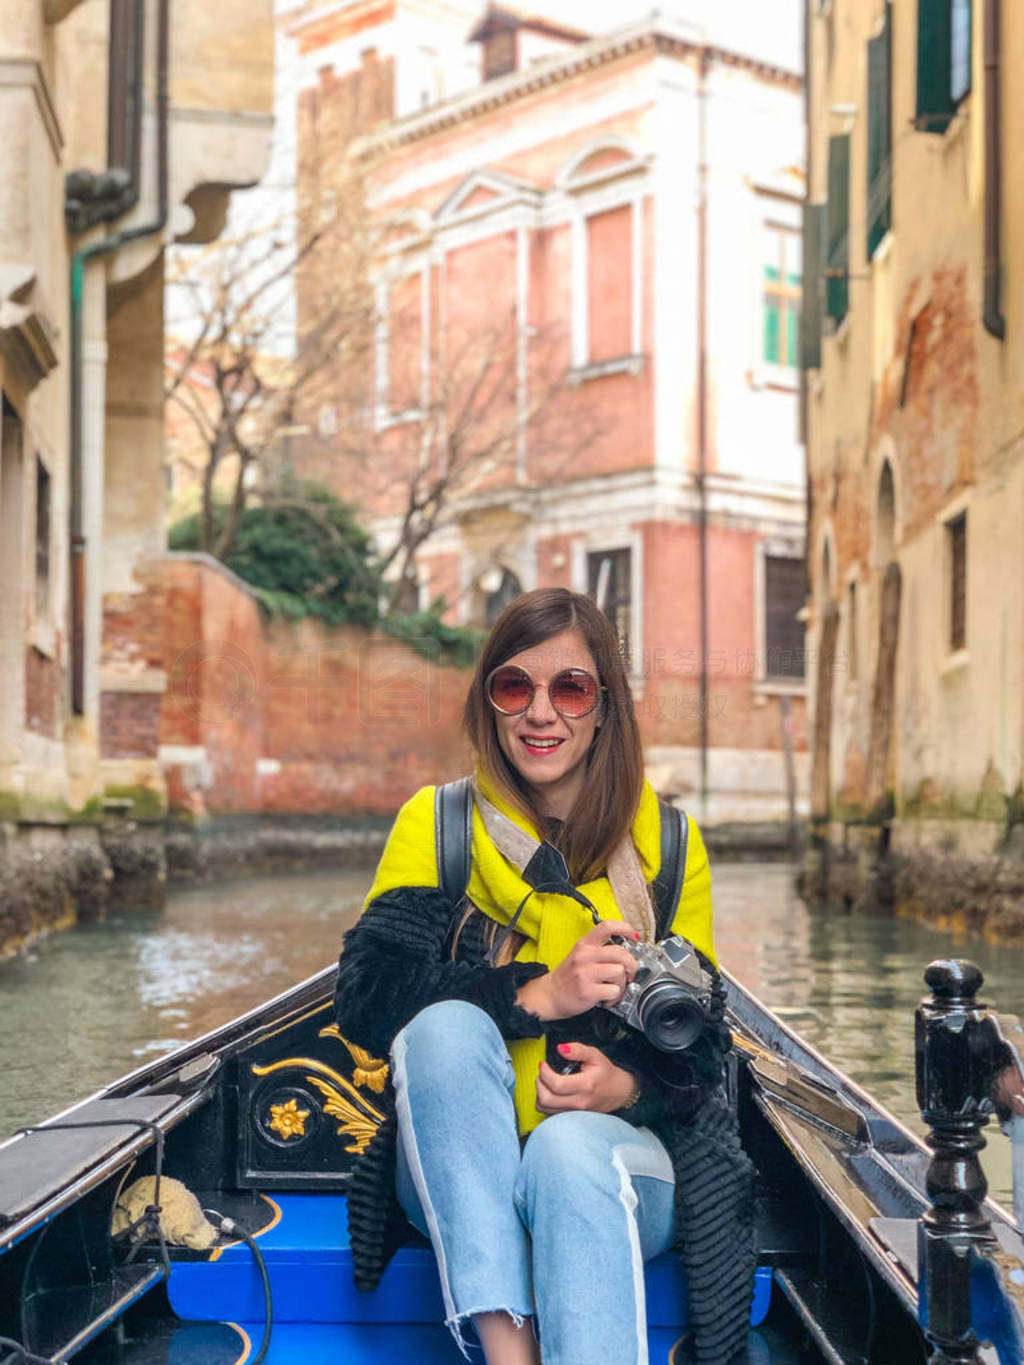 A young woman enjoys a gondola ride and making photo in the cana